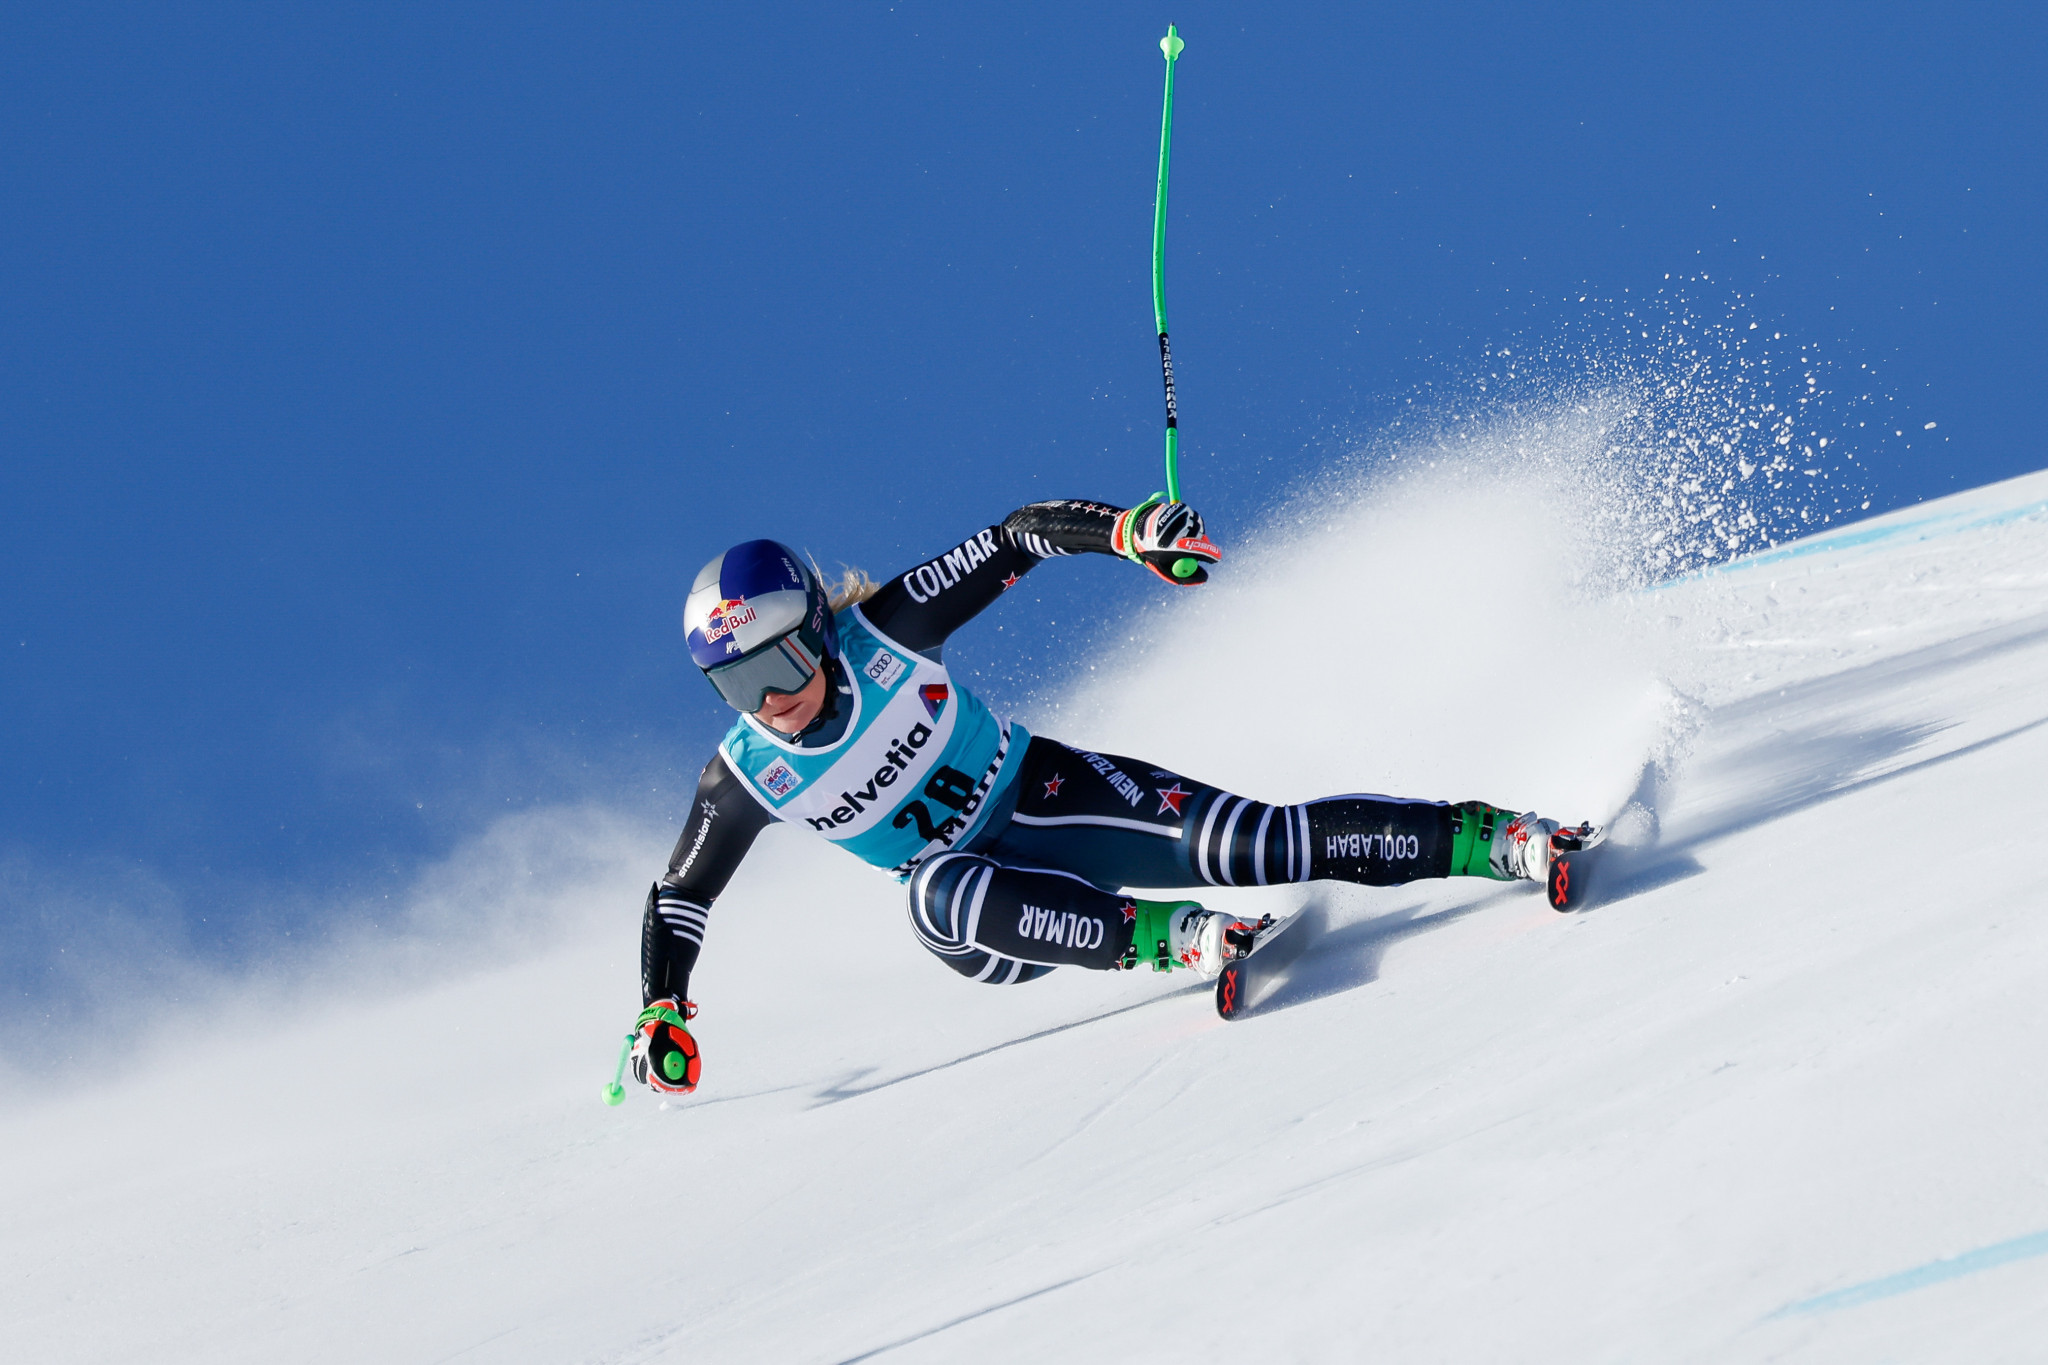 New Zealand's Alice Robinson has already missed the FIS Alpine Ski World Cups in Val d'Isère and Courchevel due to COVID-19 ©Getty Images